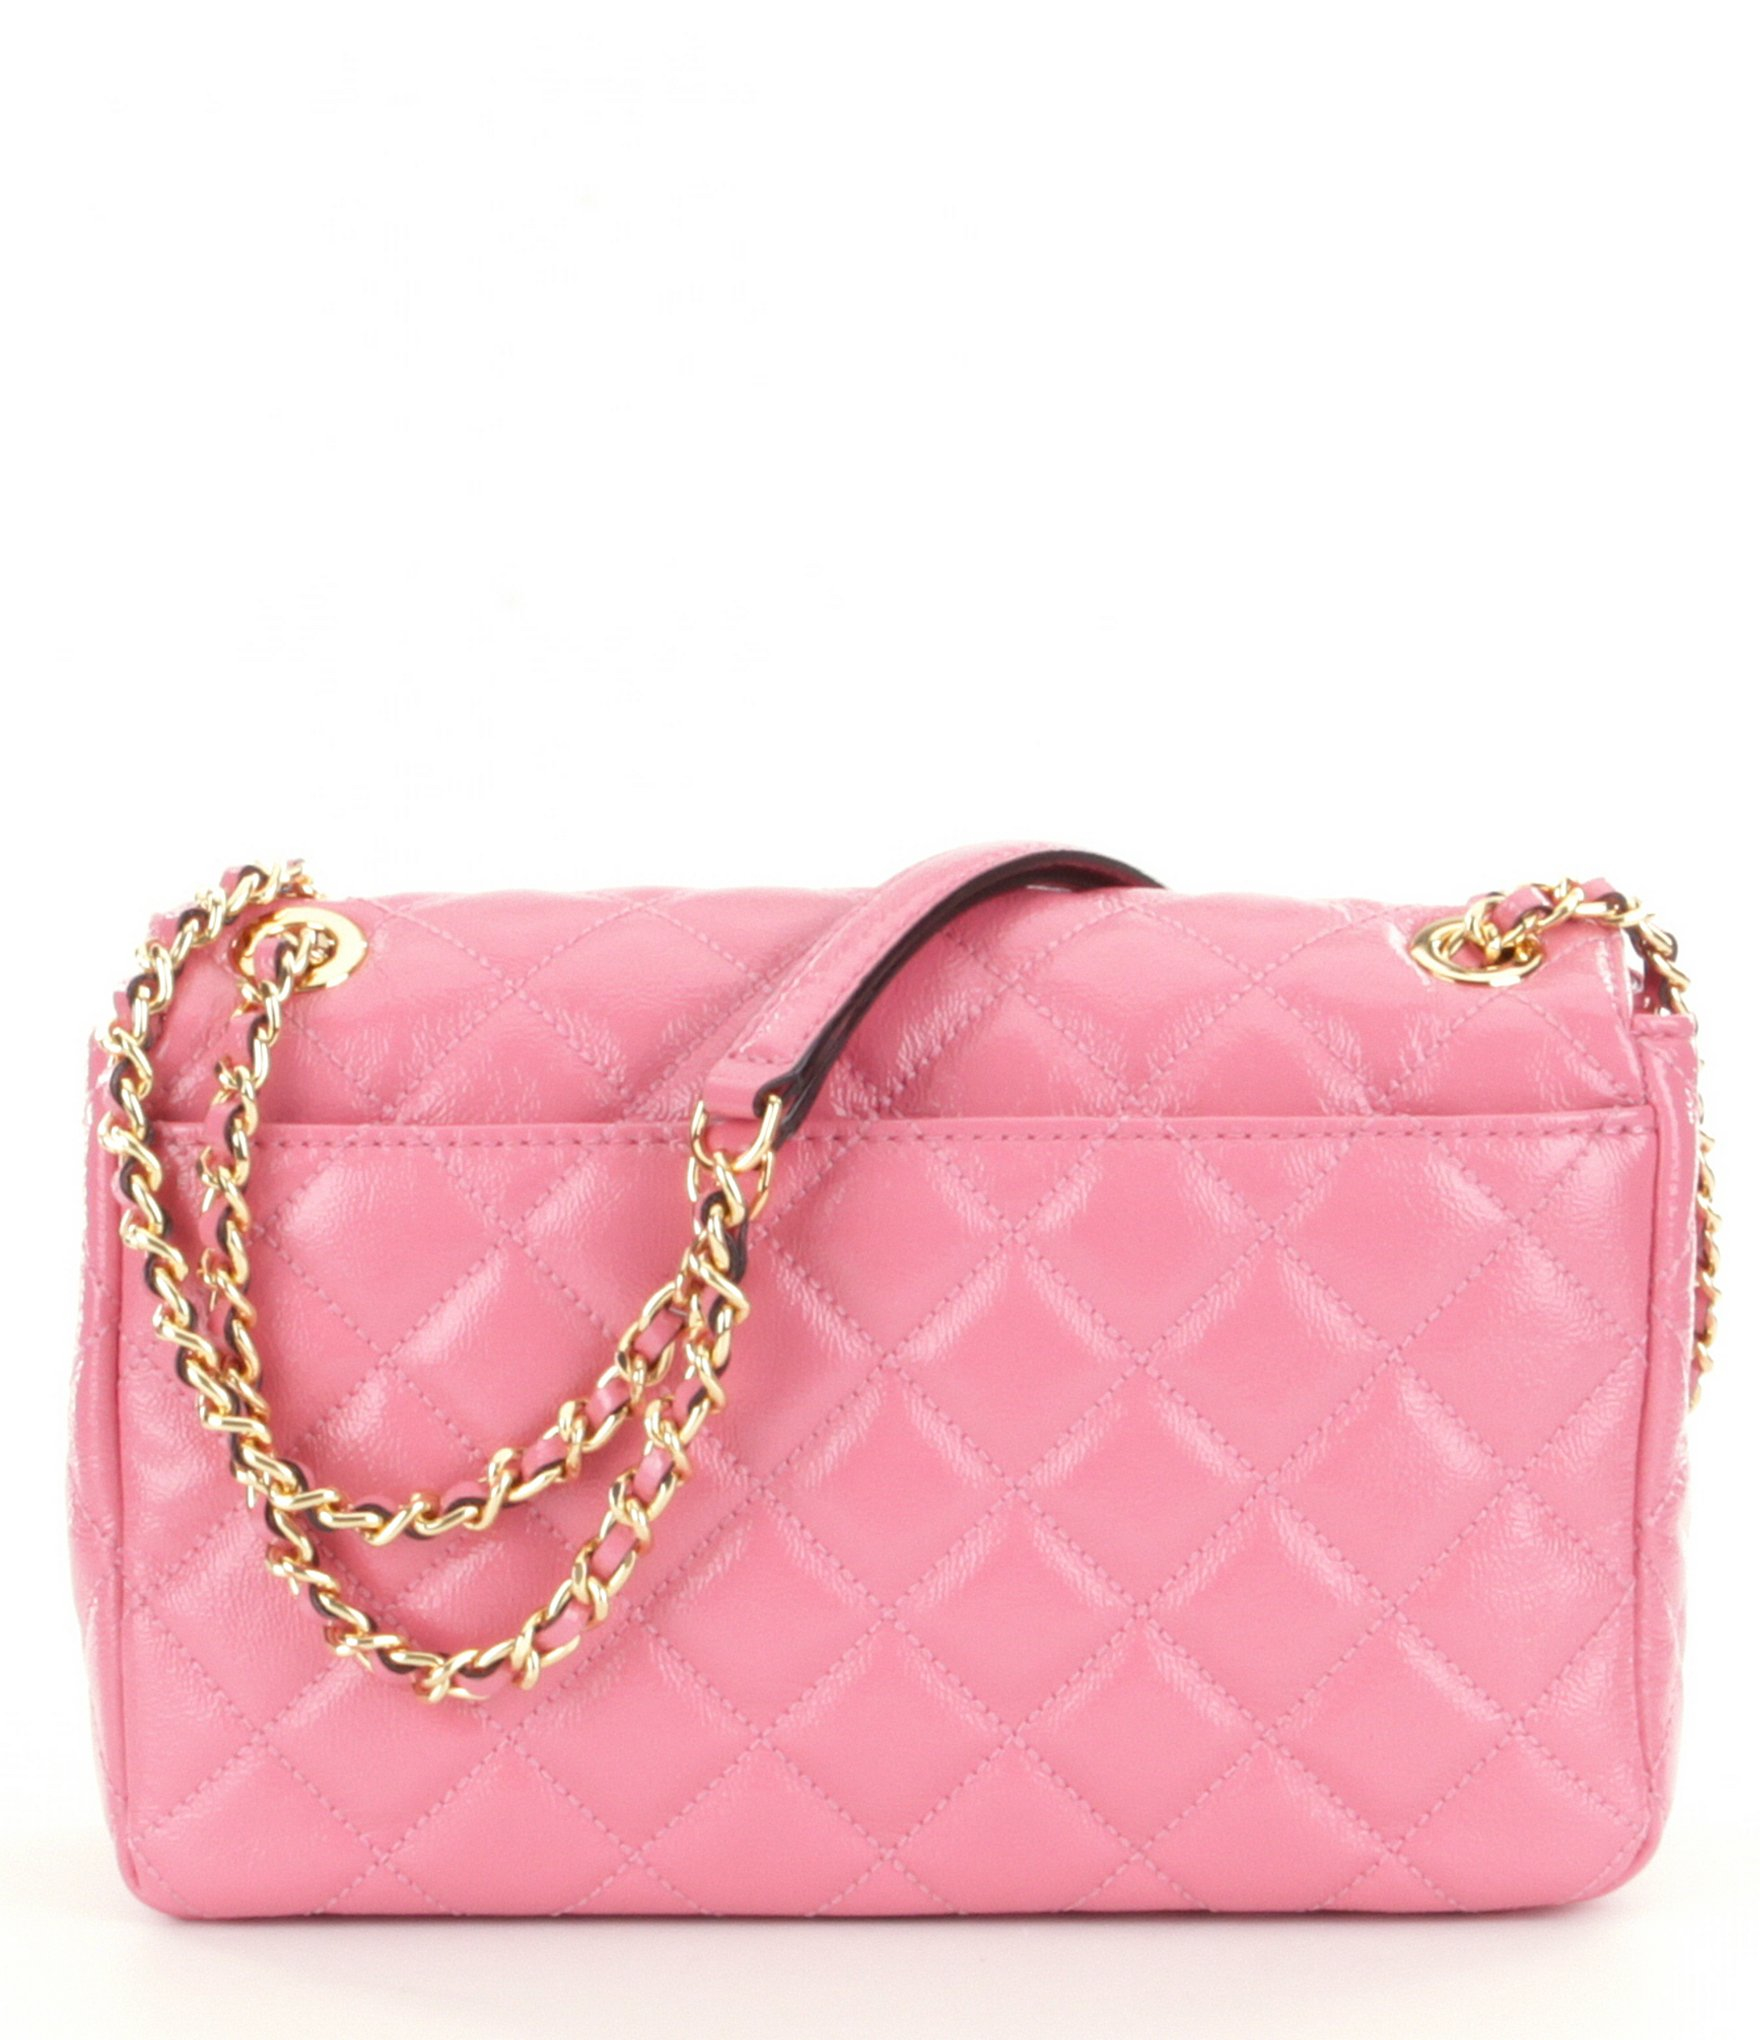 MICHAEL Michael Kors Sloan Quilted Patent Leather Chain-strap Large Shoulder Bag in Pink - Lyst